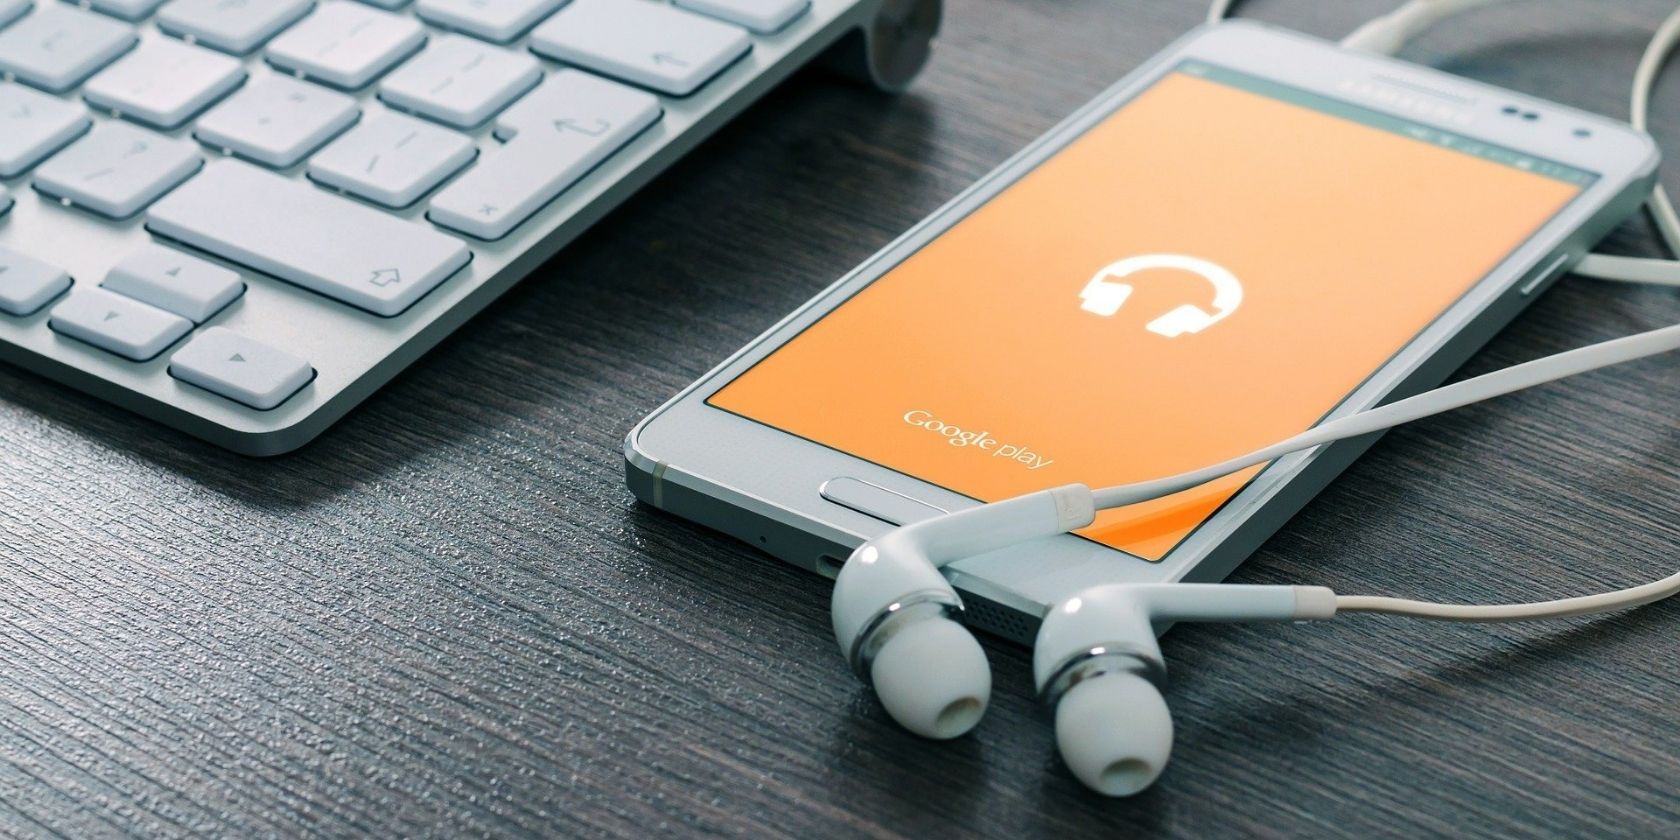 google play music service loading on a smartphone